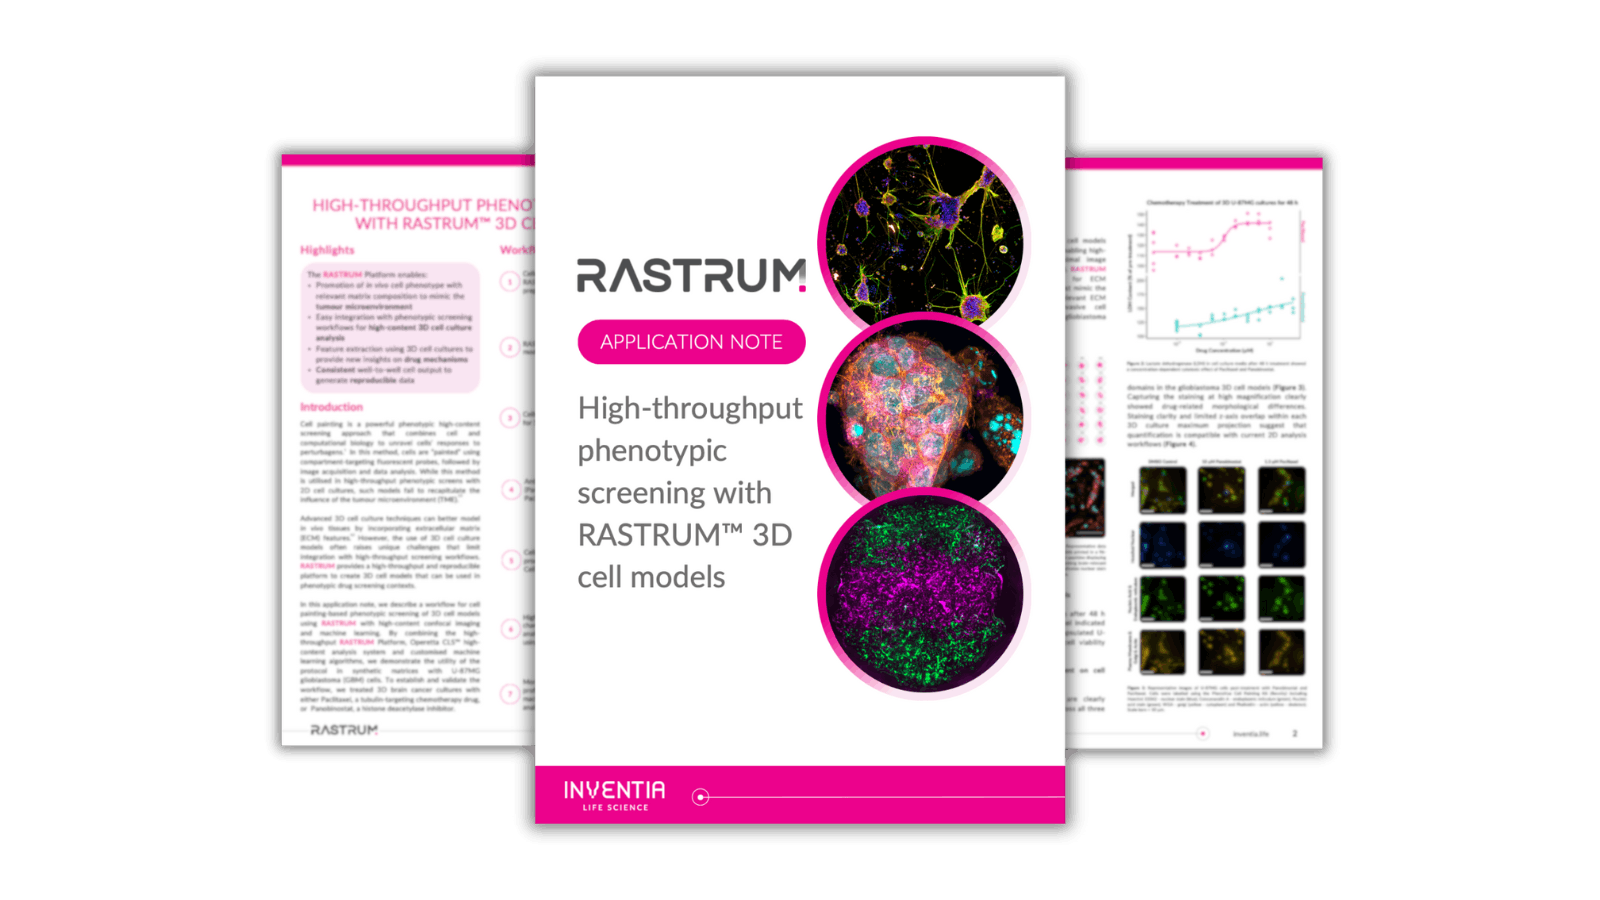 High-throughput phenotypic screening with RASTRUM™ 3D cell models